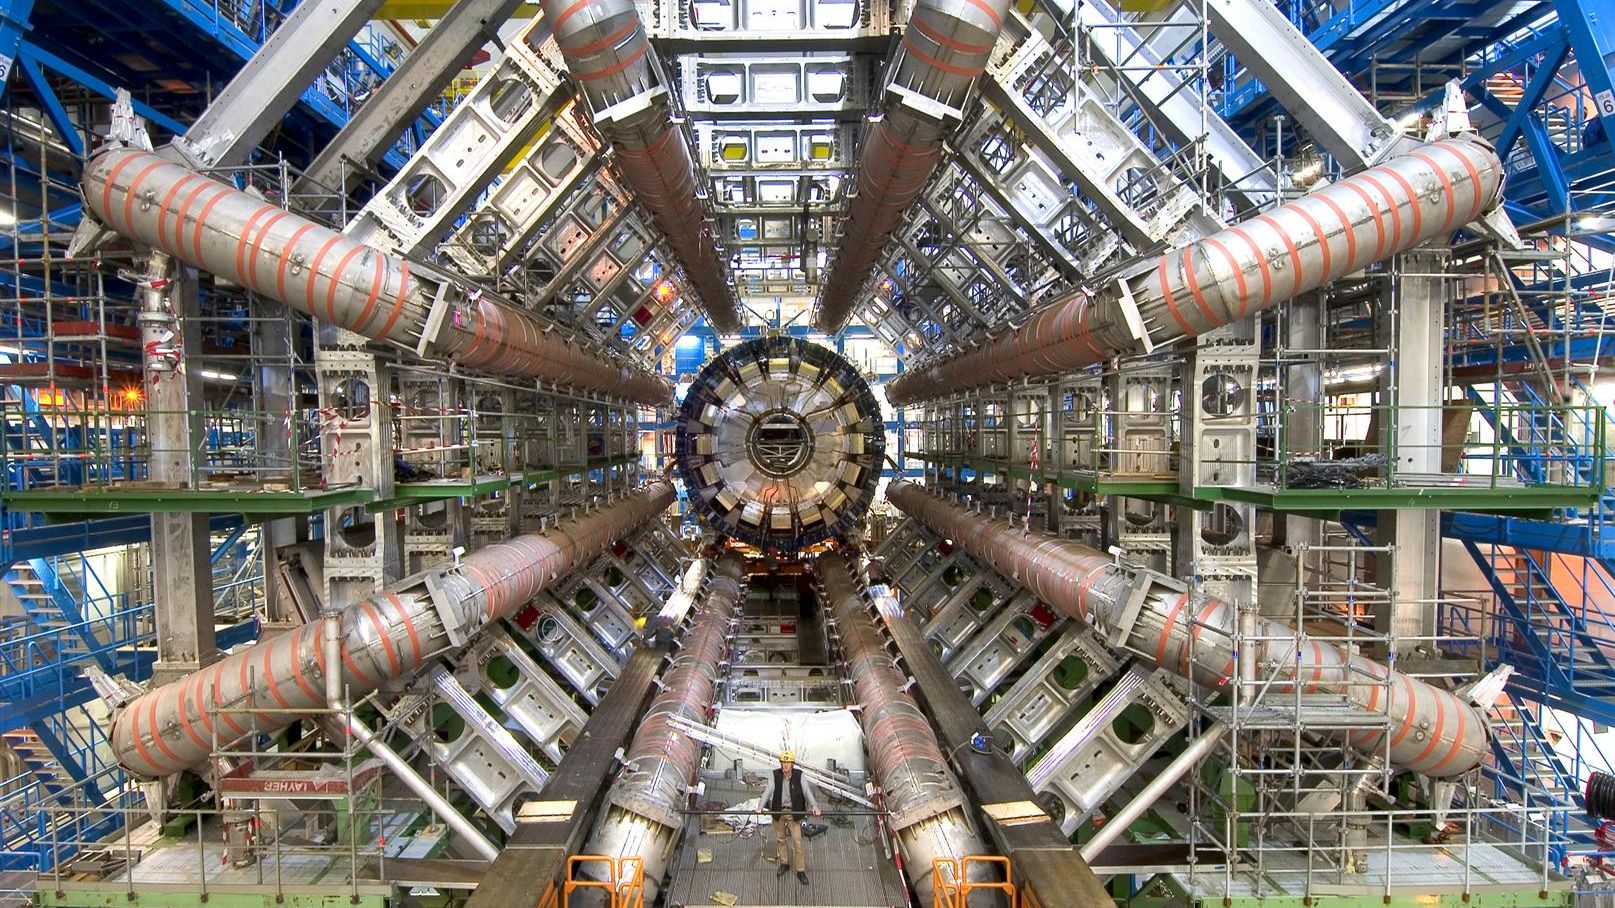 Daniel Valuch chats about CERN’s high caliber hacking